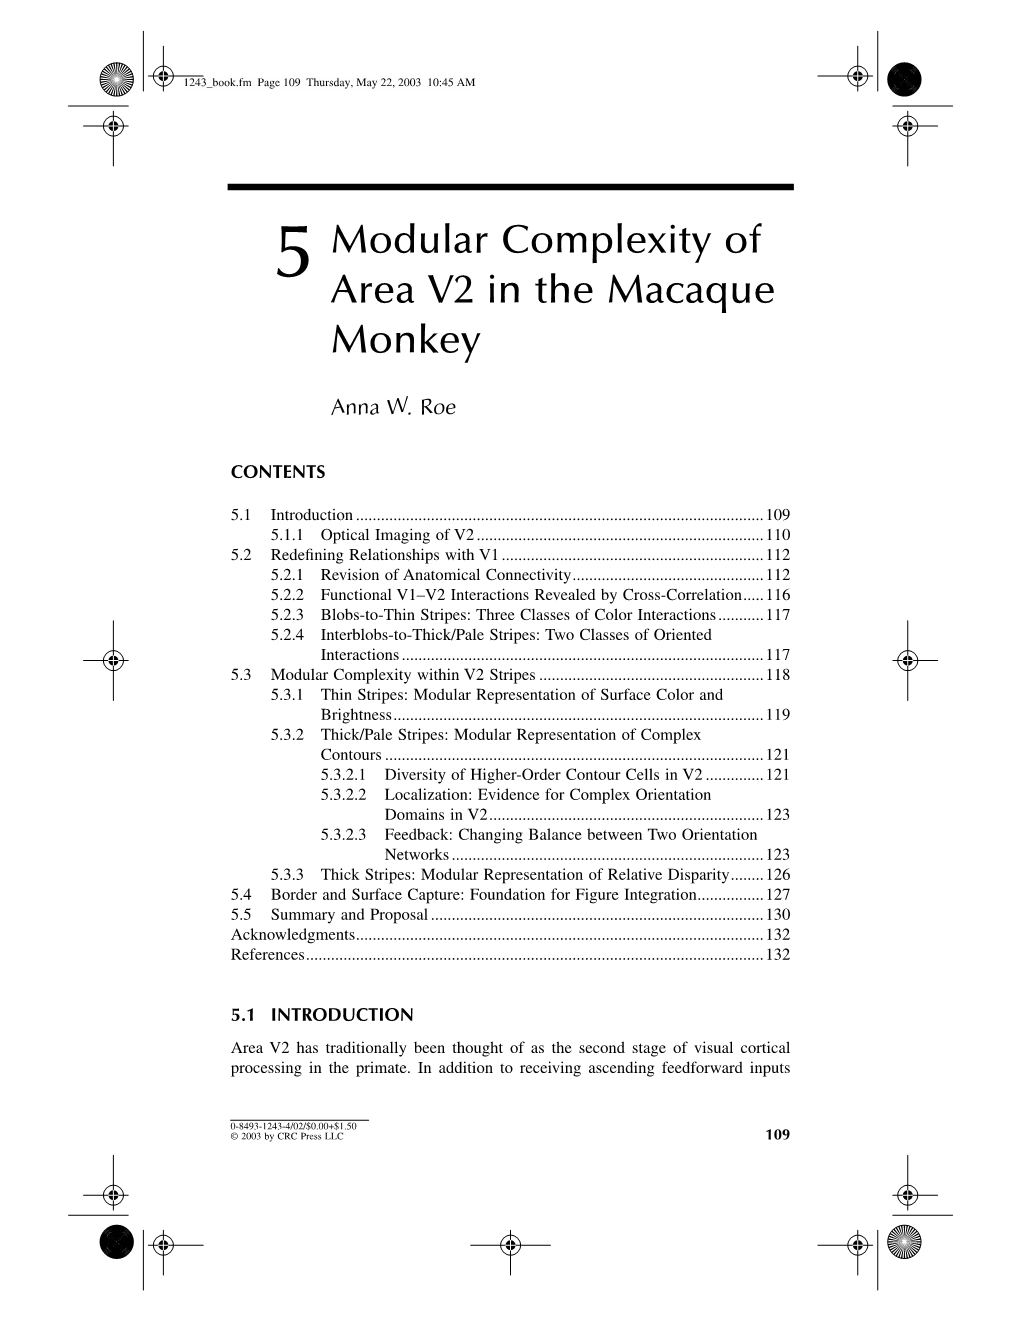 5 Modular Complexity of Area V2 in the Macaque Monkey